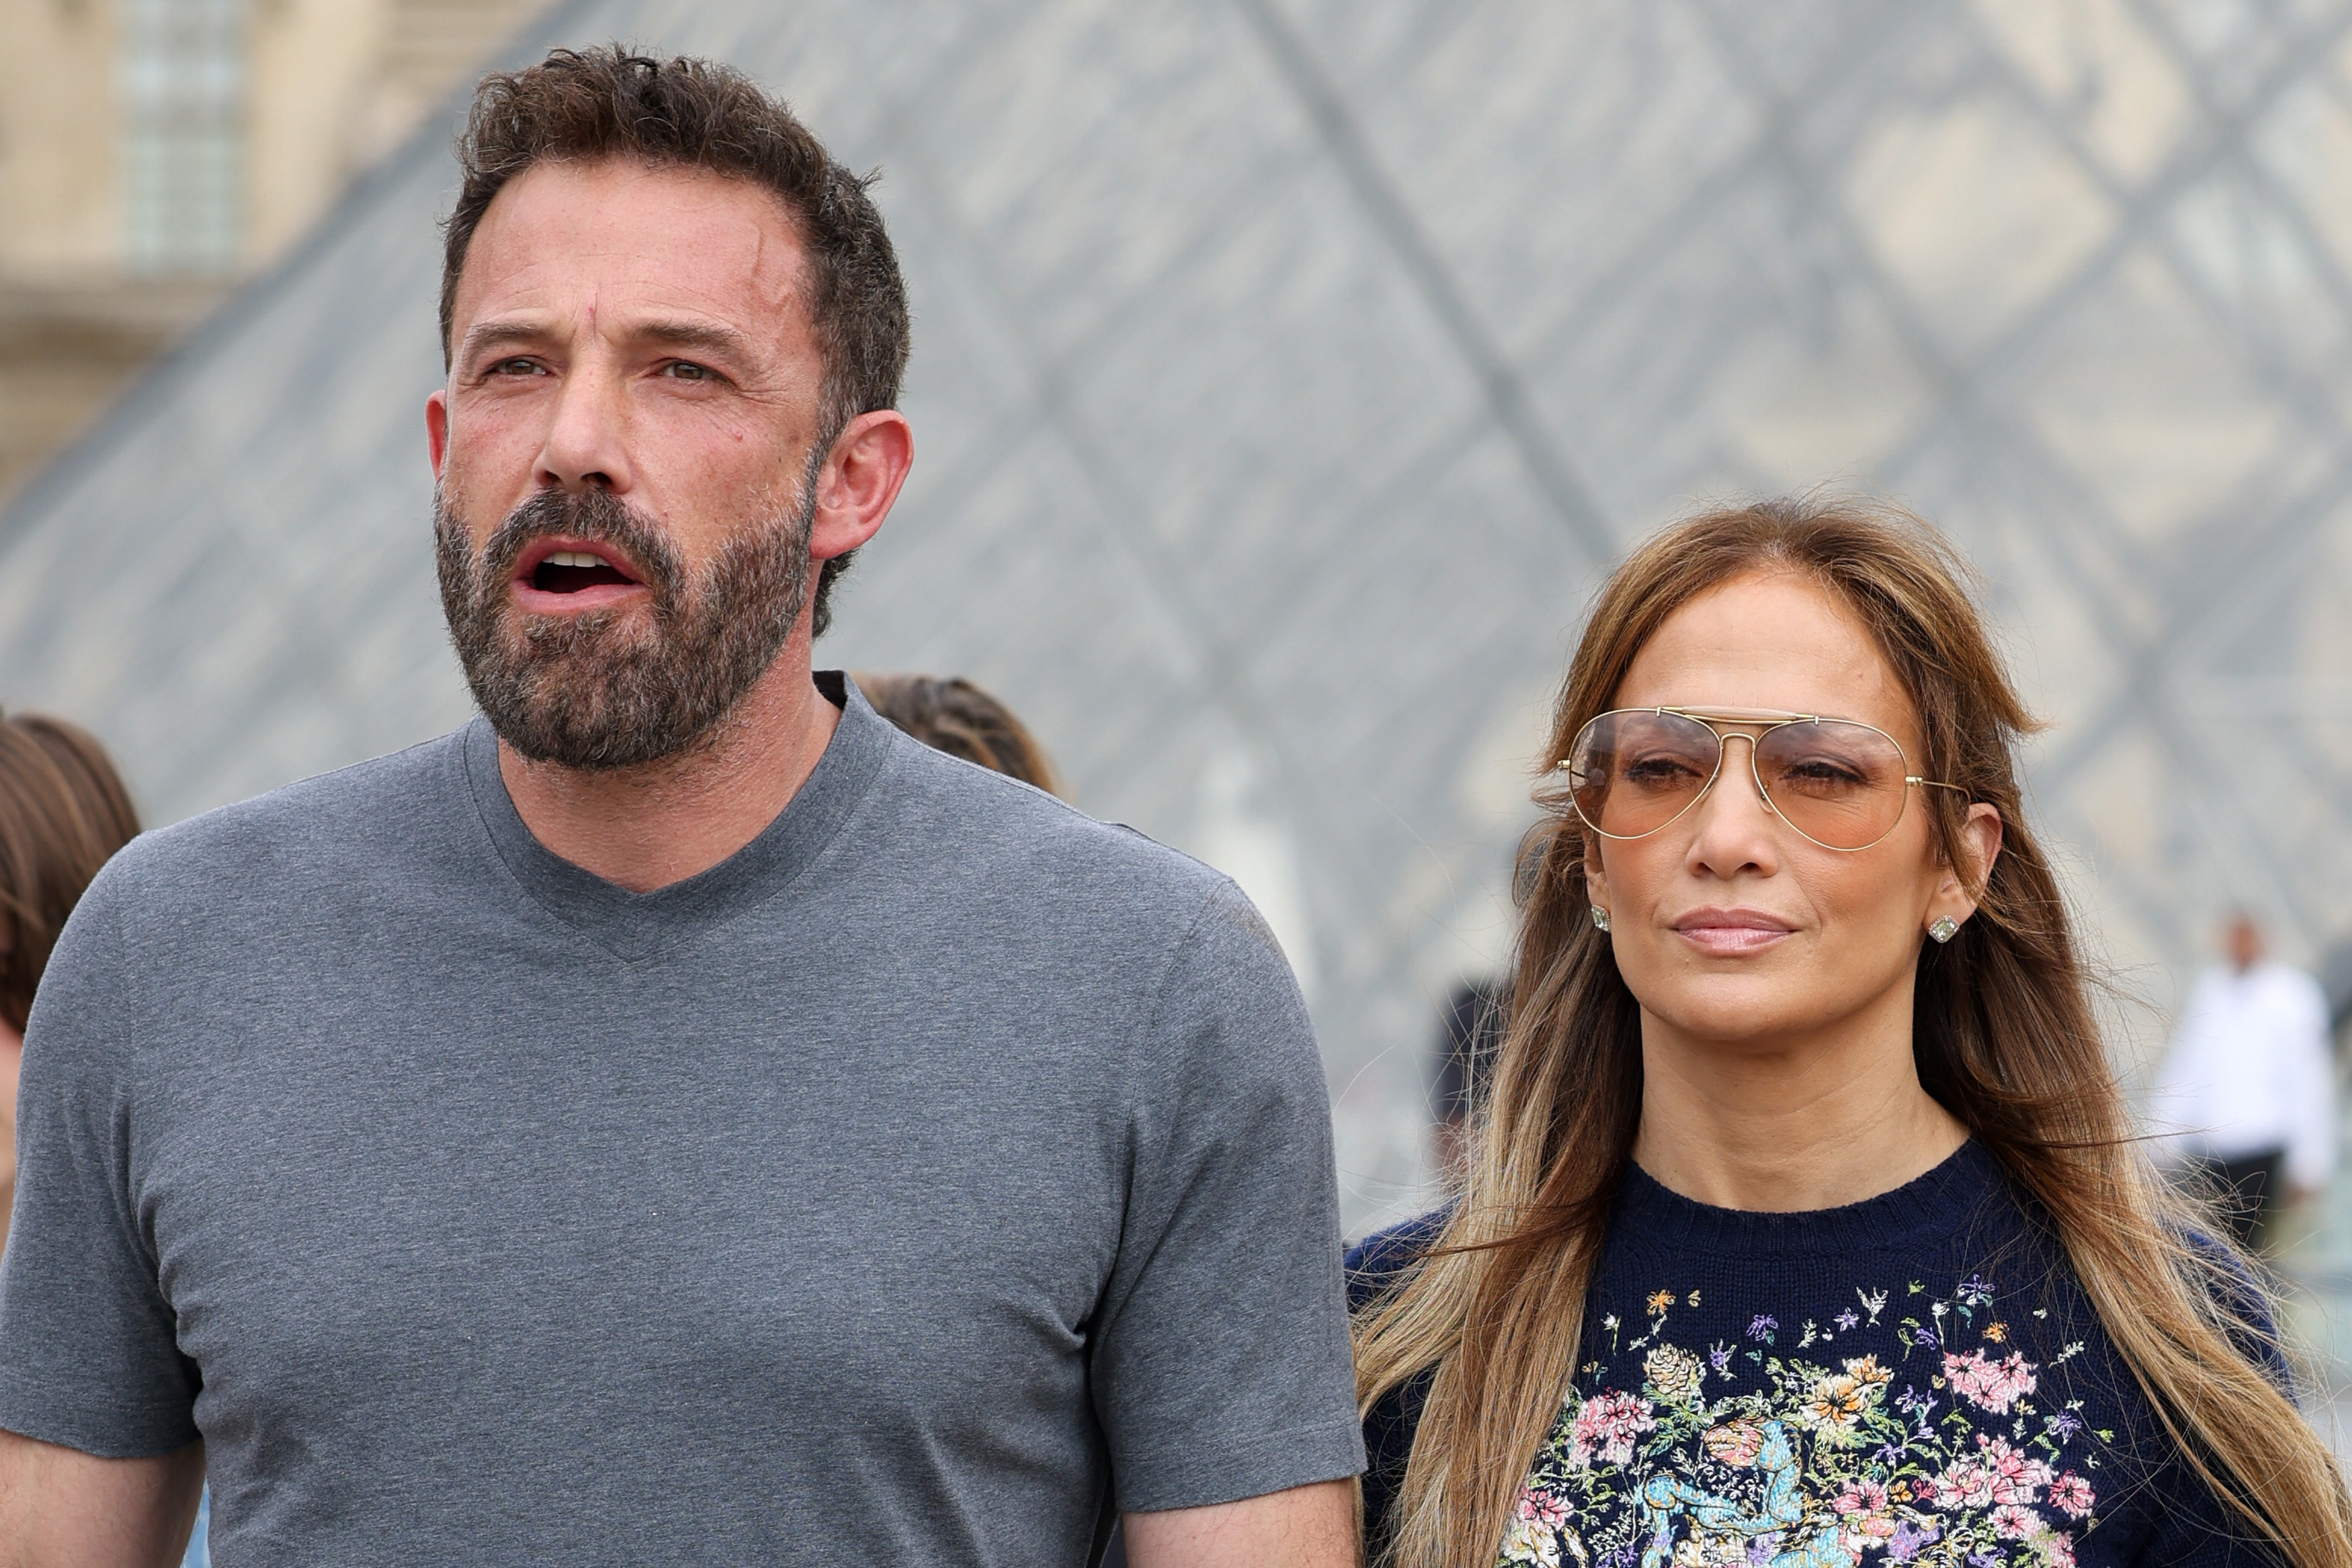 Ben Affleck and Jennifer Lopez at the Louvre Museum in Paris on July 26, 2022 | Source: Getty Images